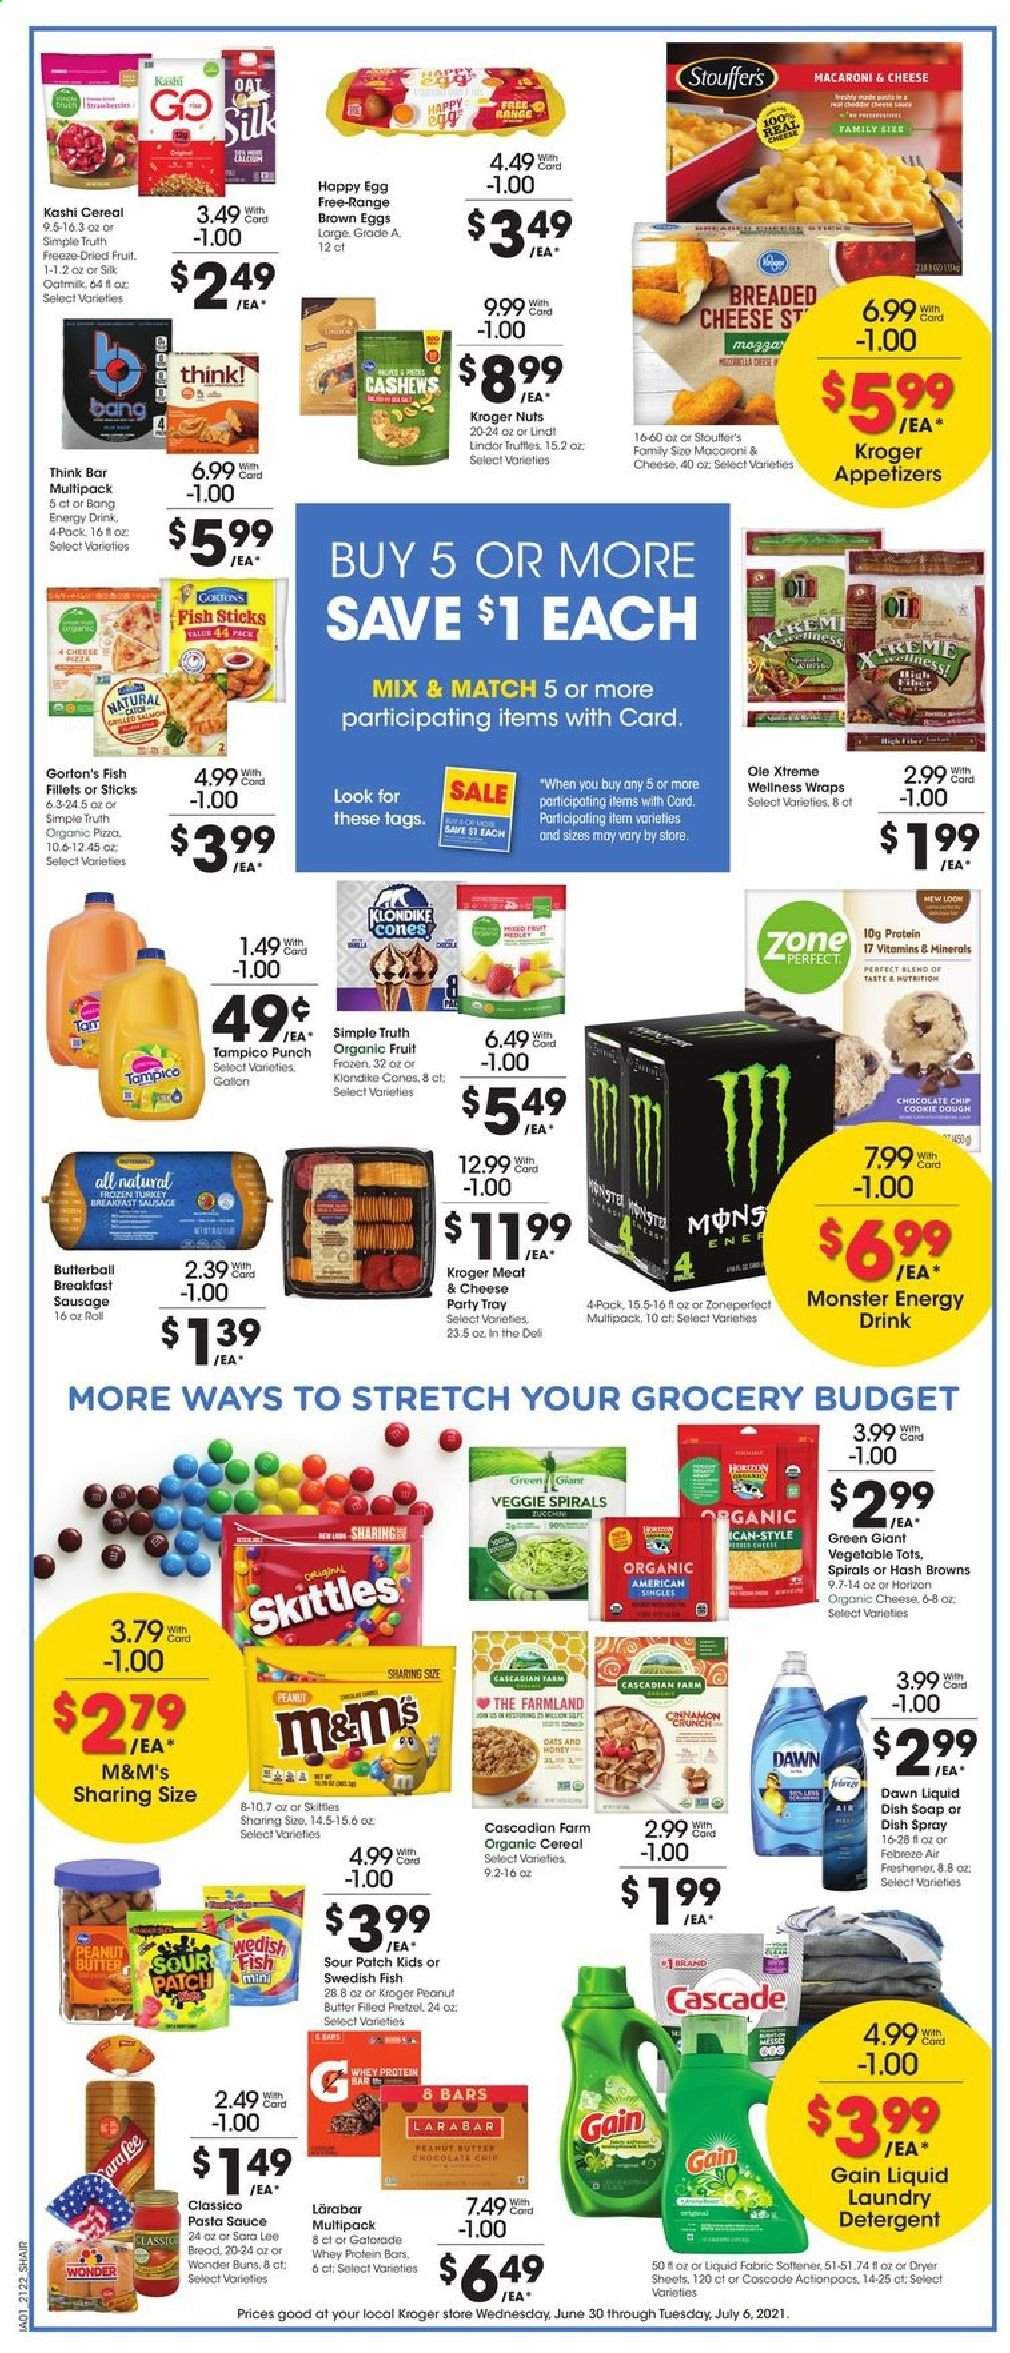 thumbnail - Kroger Flyer - 06/30/2021 - 07/06/2021 - Sales products - Sara Lee, wraps, fish fillets, fish fingers, Gorton's, fish sticks, pizza, pasta sauce, sauce, sausage, Silk, oat milk, eggs, Stouffer's, hash browns, cookie dough, Lindt, Lindor, truffles, M&M's, Skittles, sour patch, oats, cereals, protein bar, cinnamon, Classico, honey, peanut butter, cashews, dried fruit, energy drink, Monster, Monster Energy, Gatorade, fruit punch, whole turkey, detergent, Gain, Cascade, laundry detergent, dryer sheets, soap, tray, air freshener, whey protein. Page 4.